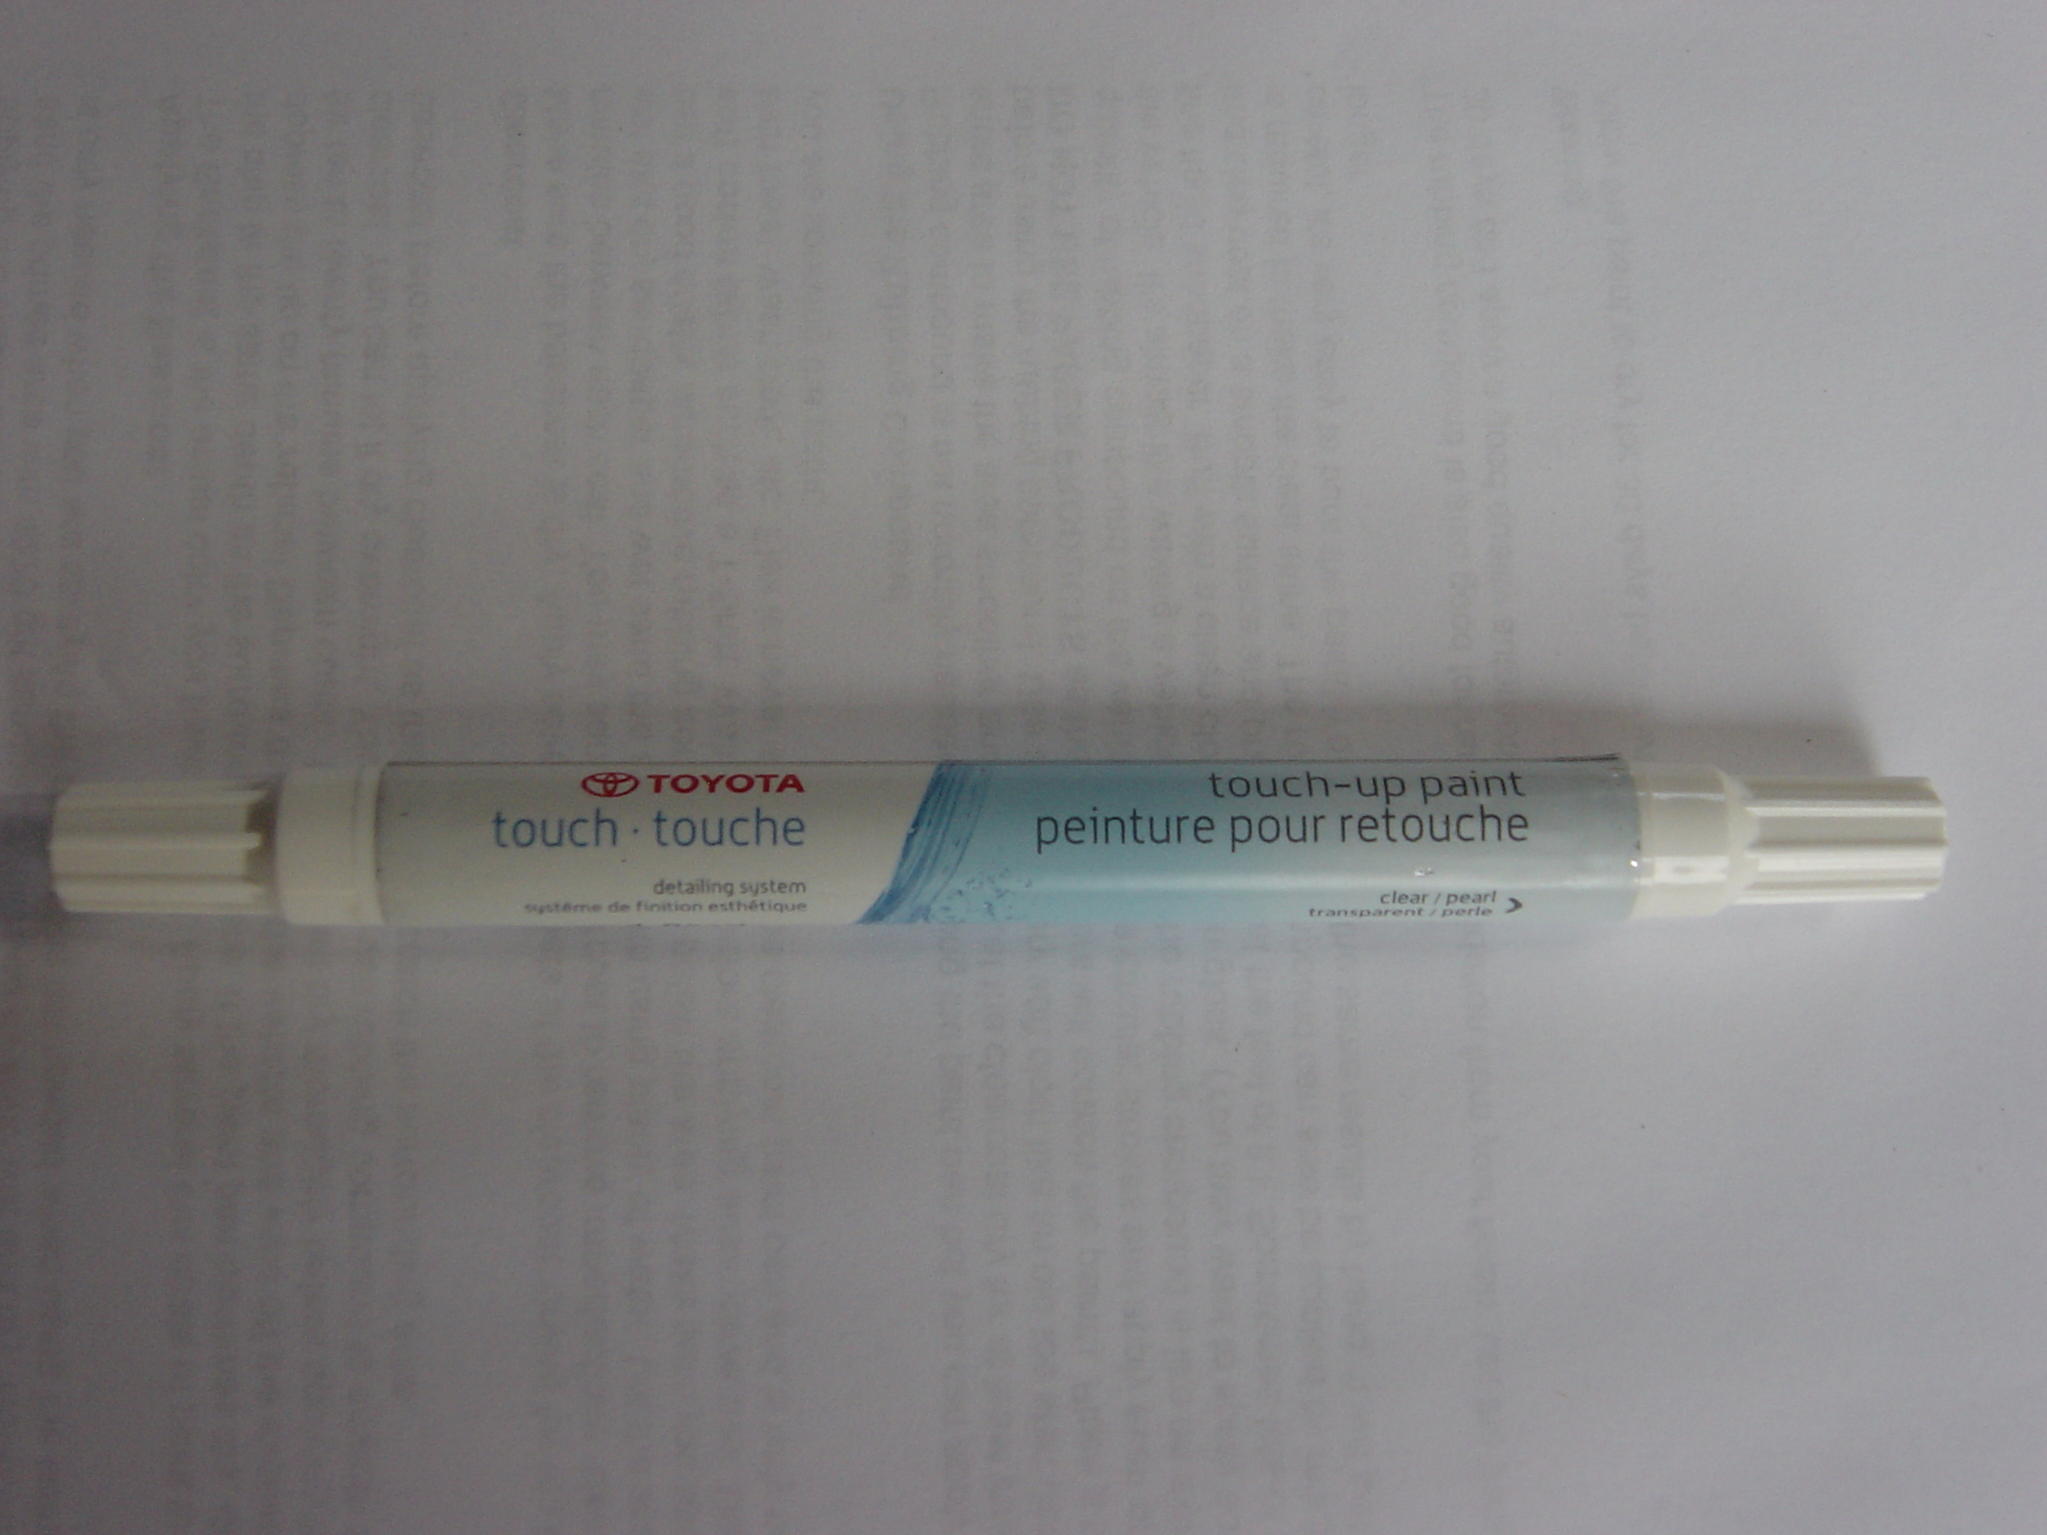  Toyota Genuine Touch up Paint Color Code 070, Blizzard